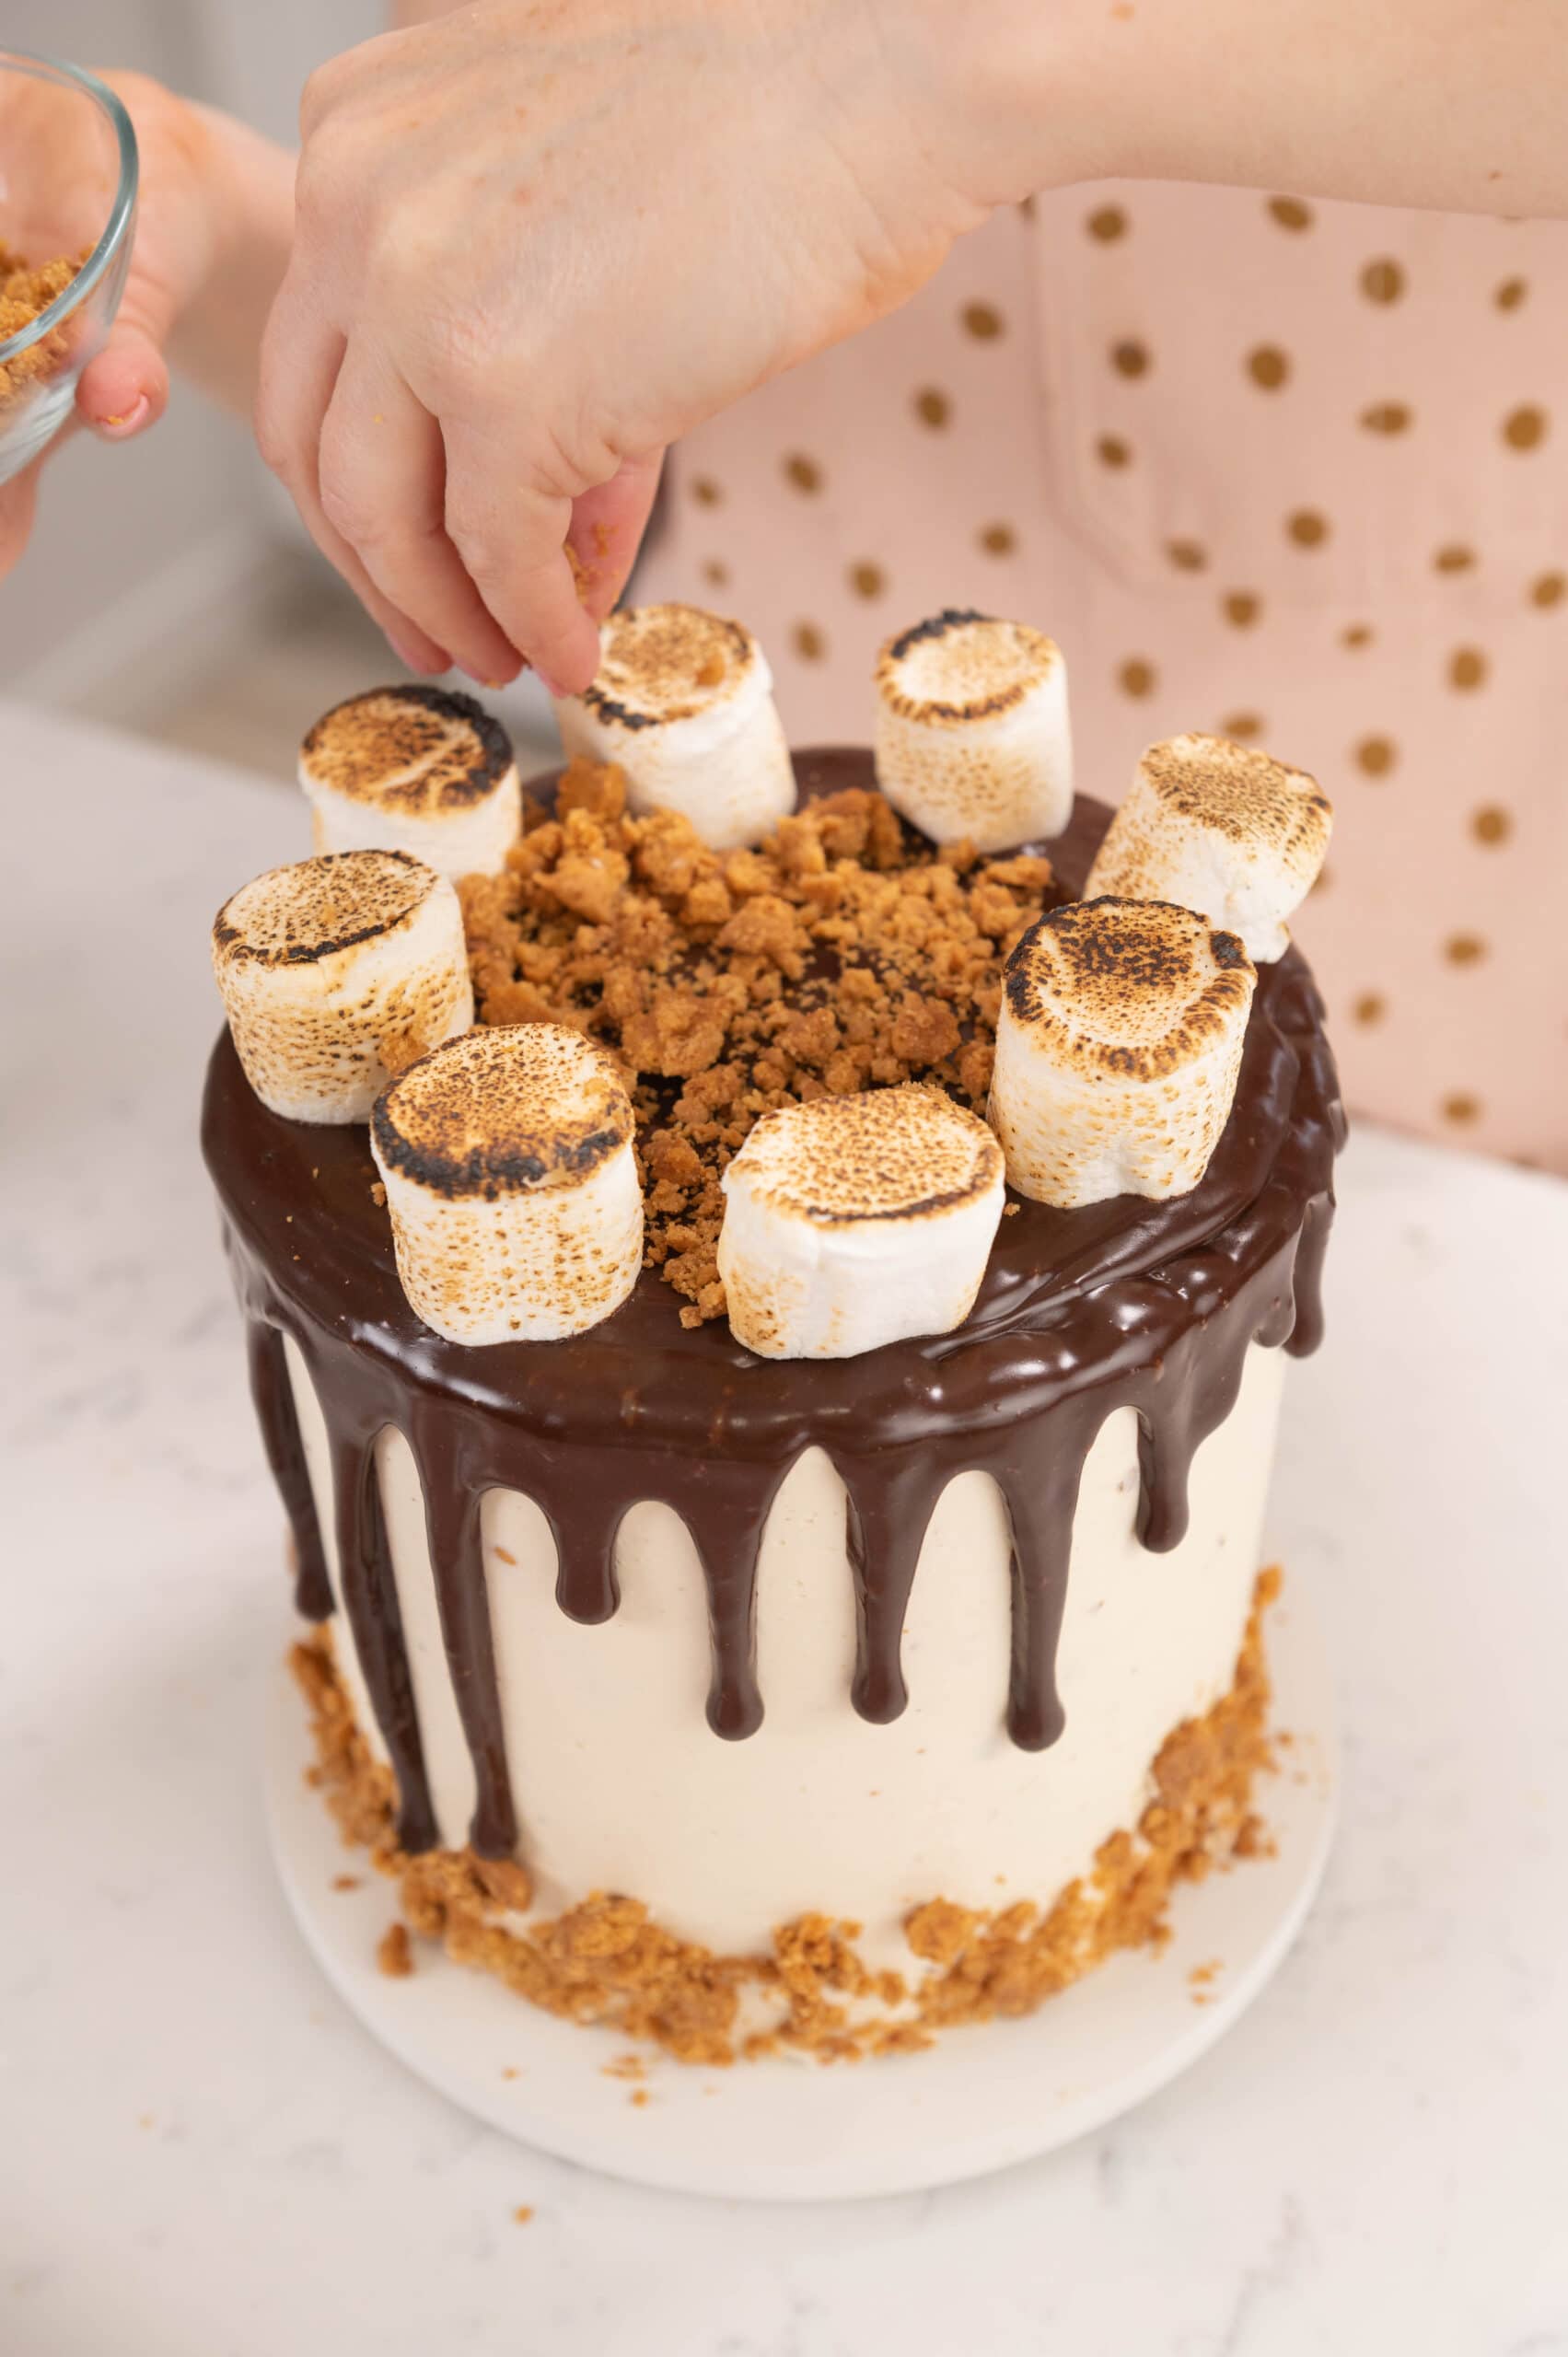 adding final details to the s'mores cake